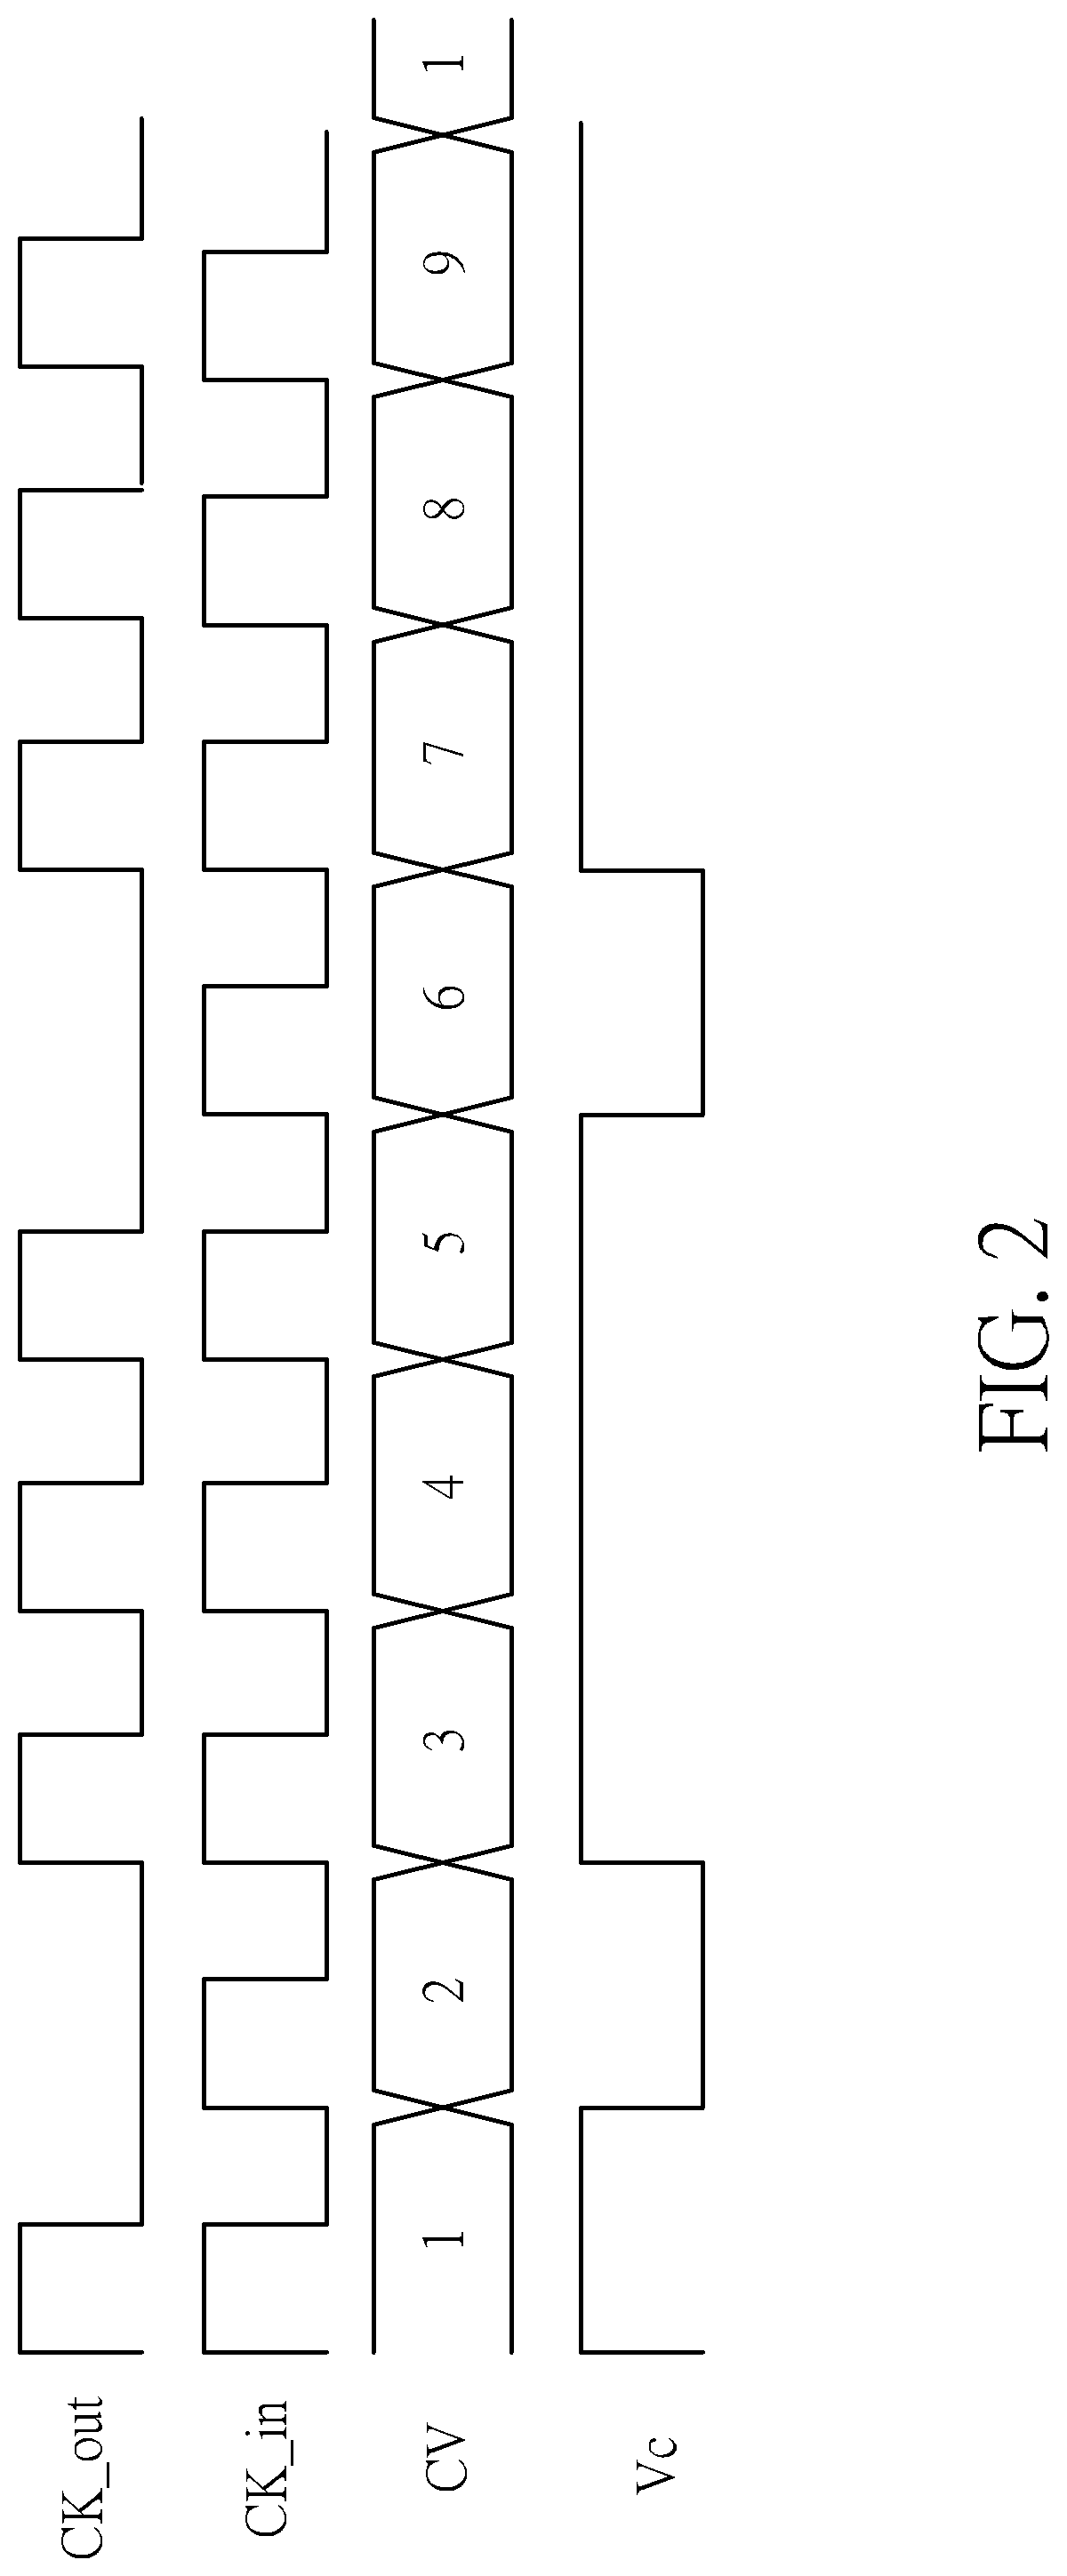 Fractional frequency divider and flash memory controller